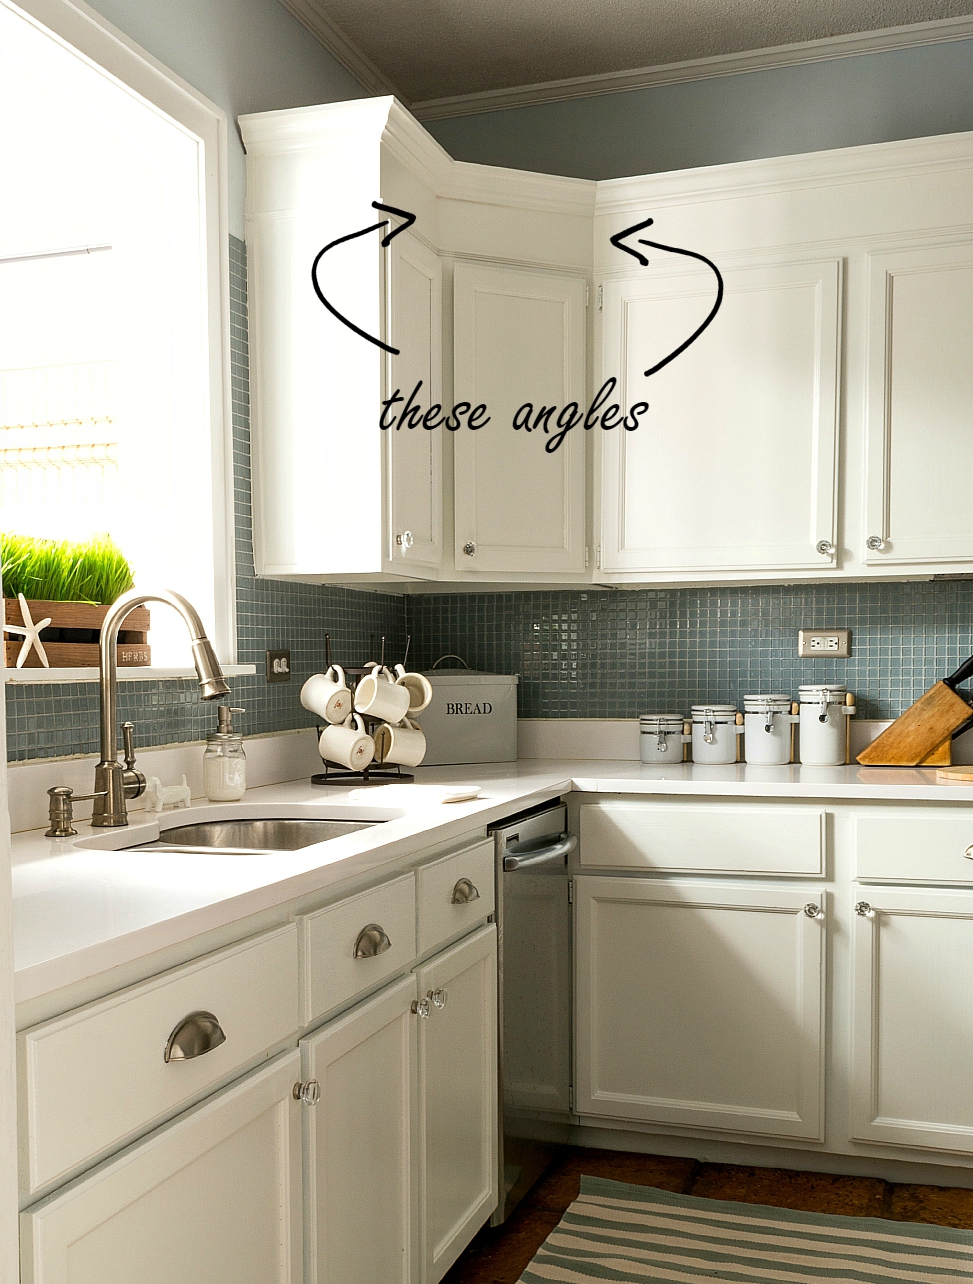 Builder Grade Kitchen Makeover With White Paint